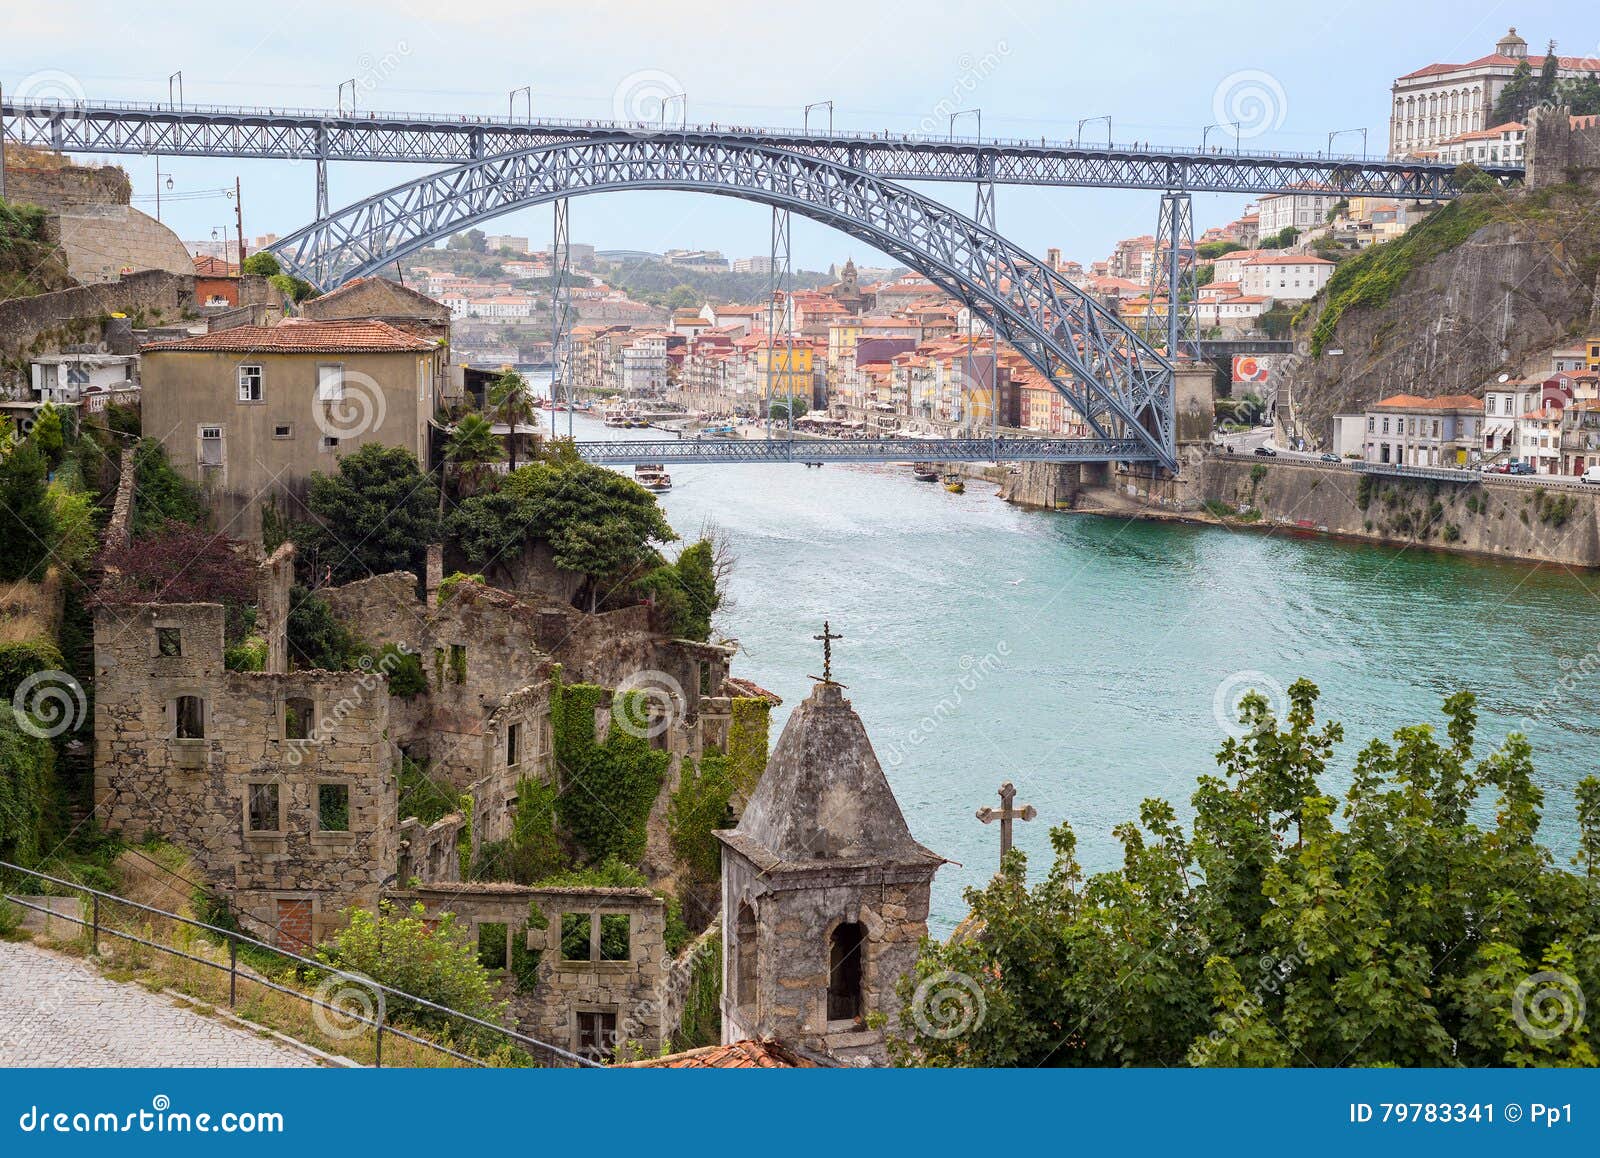 dom luis bridge and porto oporto downtown viewed from romantic church ruins